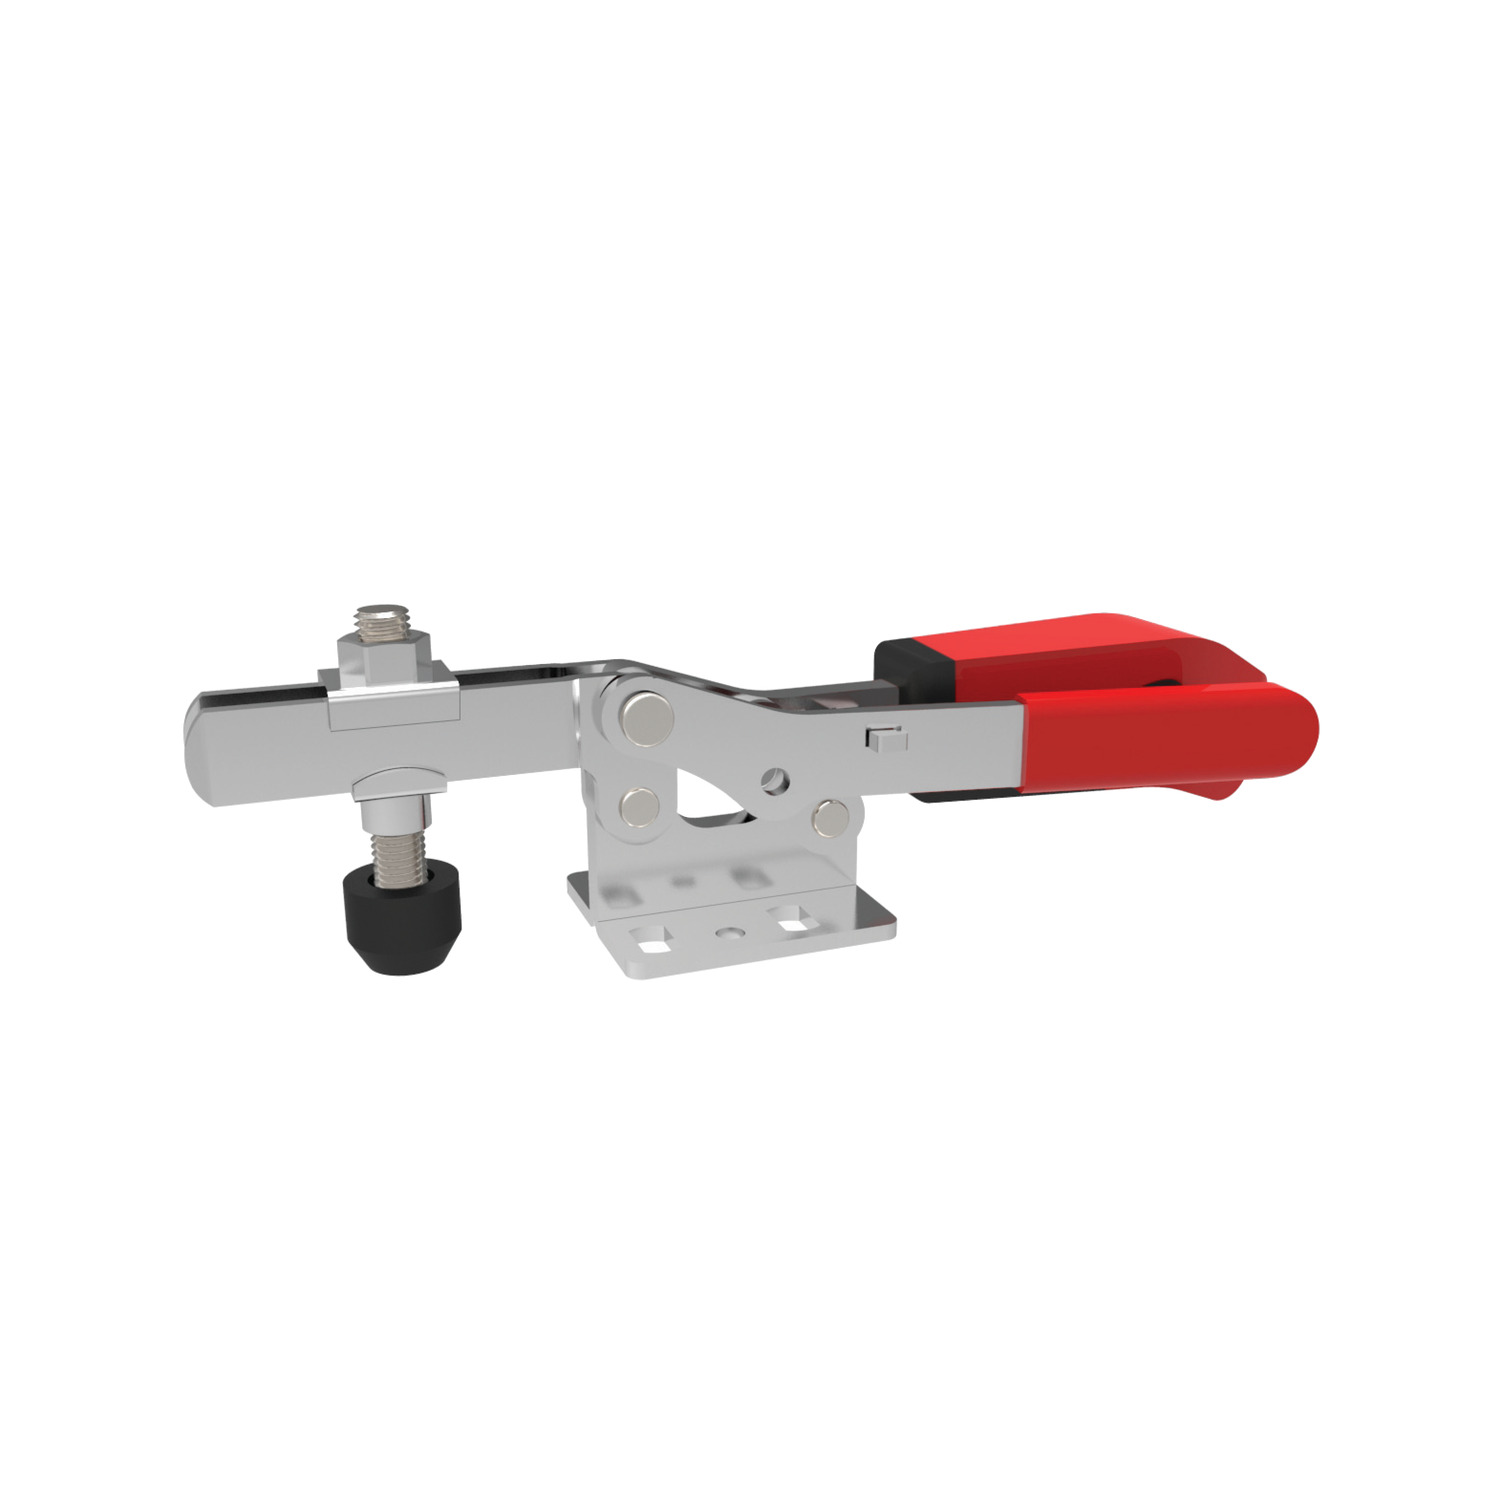 Safety Lever Horizontal Acting Toggle Clamps The safety lever holds the clamping arm in both the clamped and open position. This prevents opening under vibration or accidental movement of the clamping arm during assembly/disassembly of the fixture.